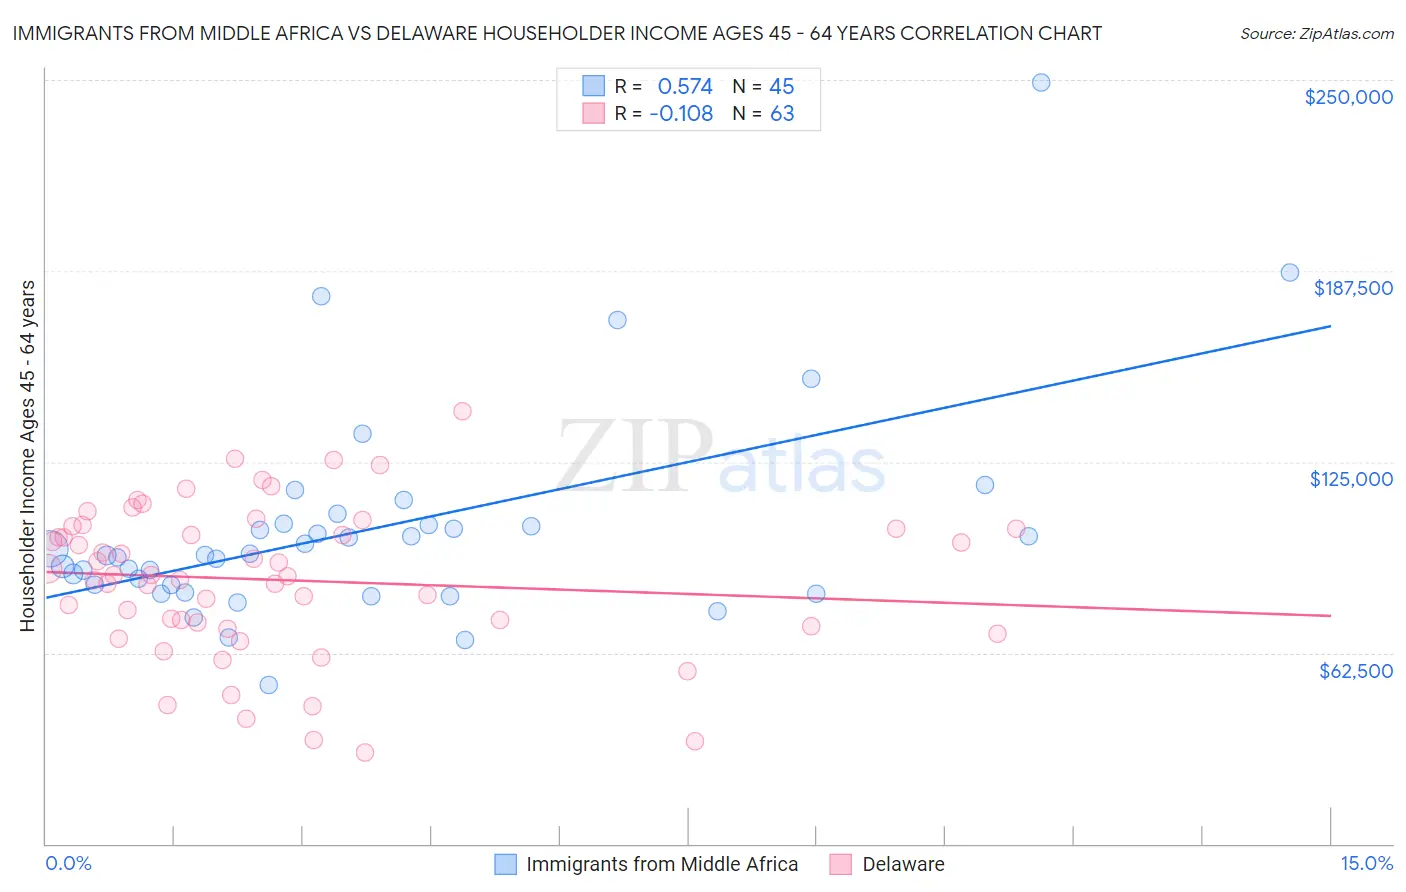 Immigrants from Middle Africa vs Delaware Householder Income Ages 45 - 64 years